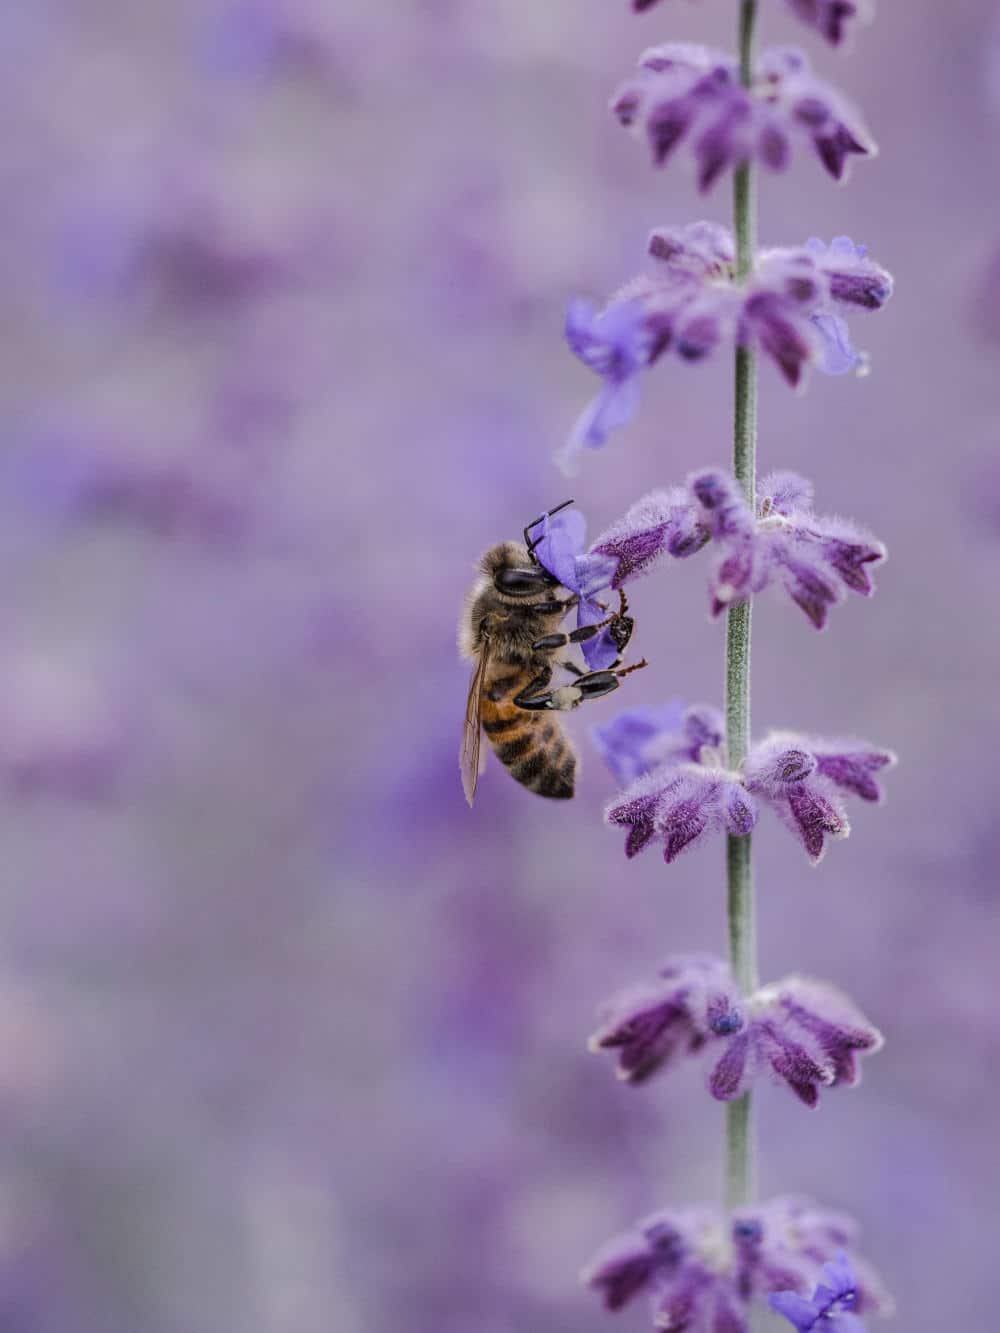 Save The Bees – 10 Ways You Can Become More Bee-Friendly